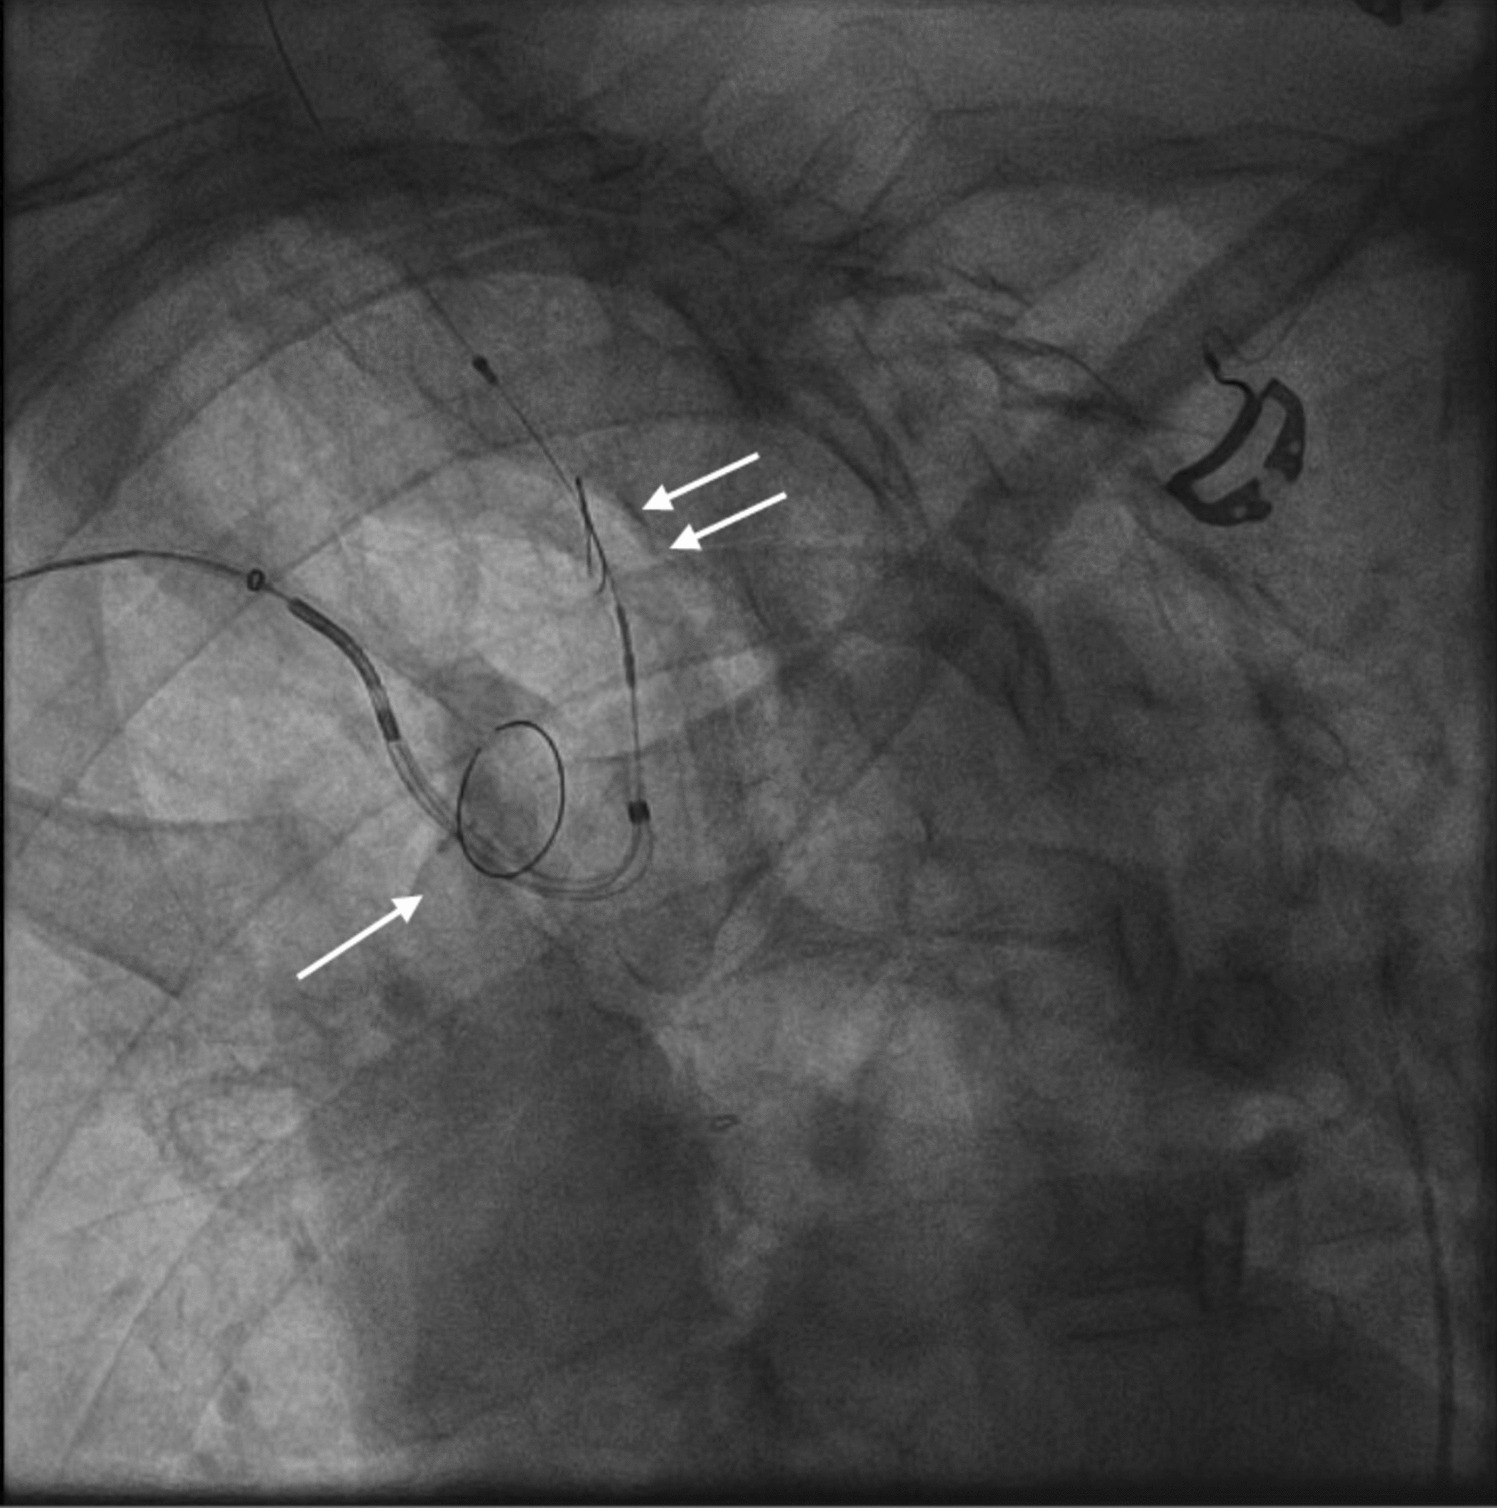 Cerebral Embolic Protection Devices for Transcatheter Aortic Valve Replacement: Review of the Literature and Future Perspectives